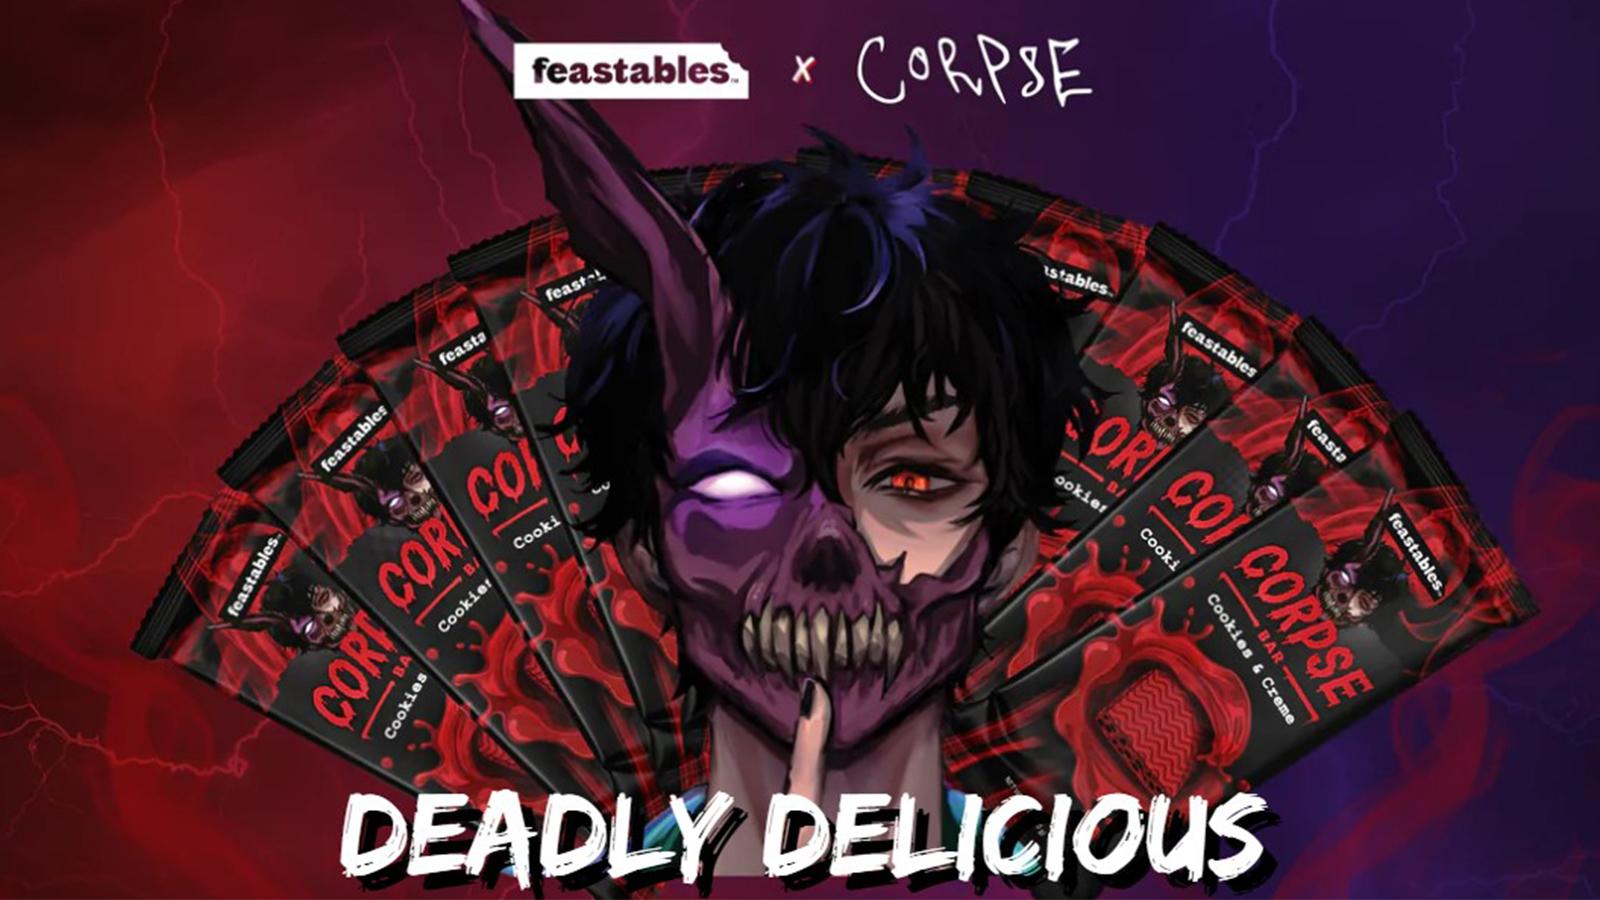 MrBeast teams up with Corpse Husband for new feastables chocolate bar